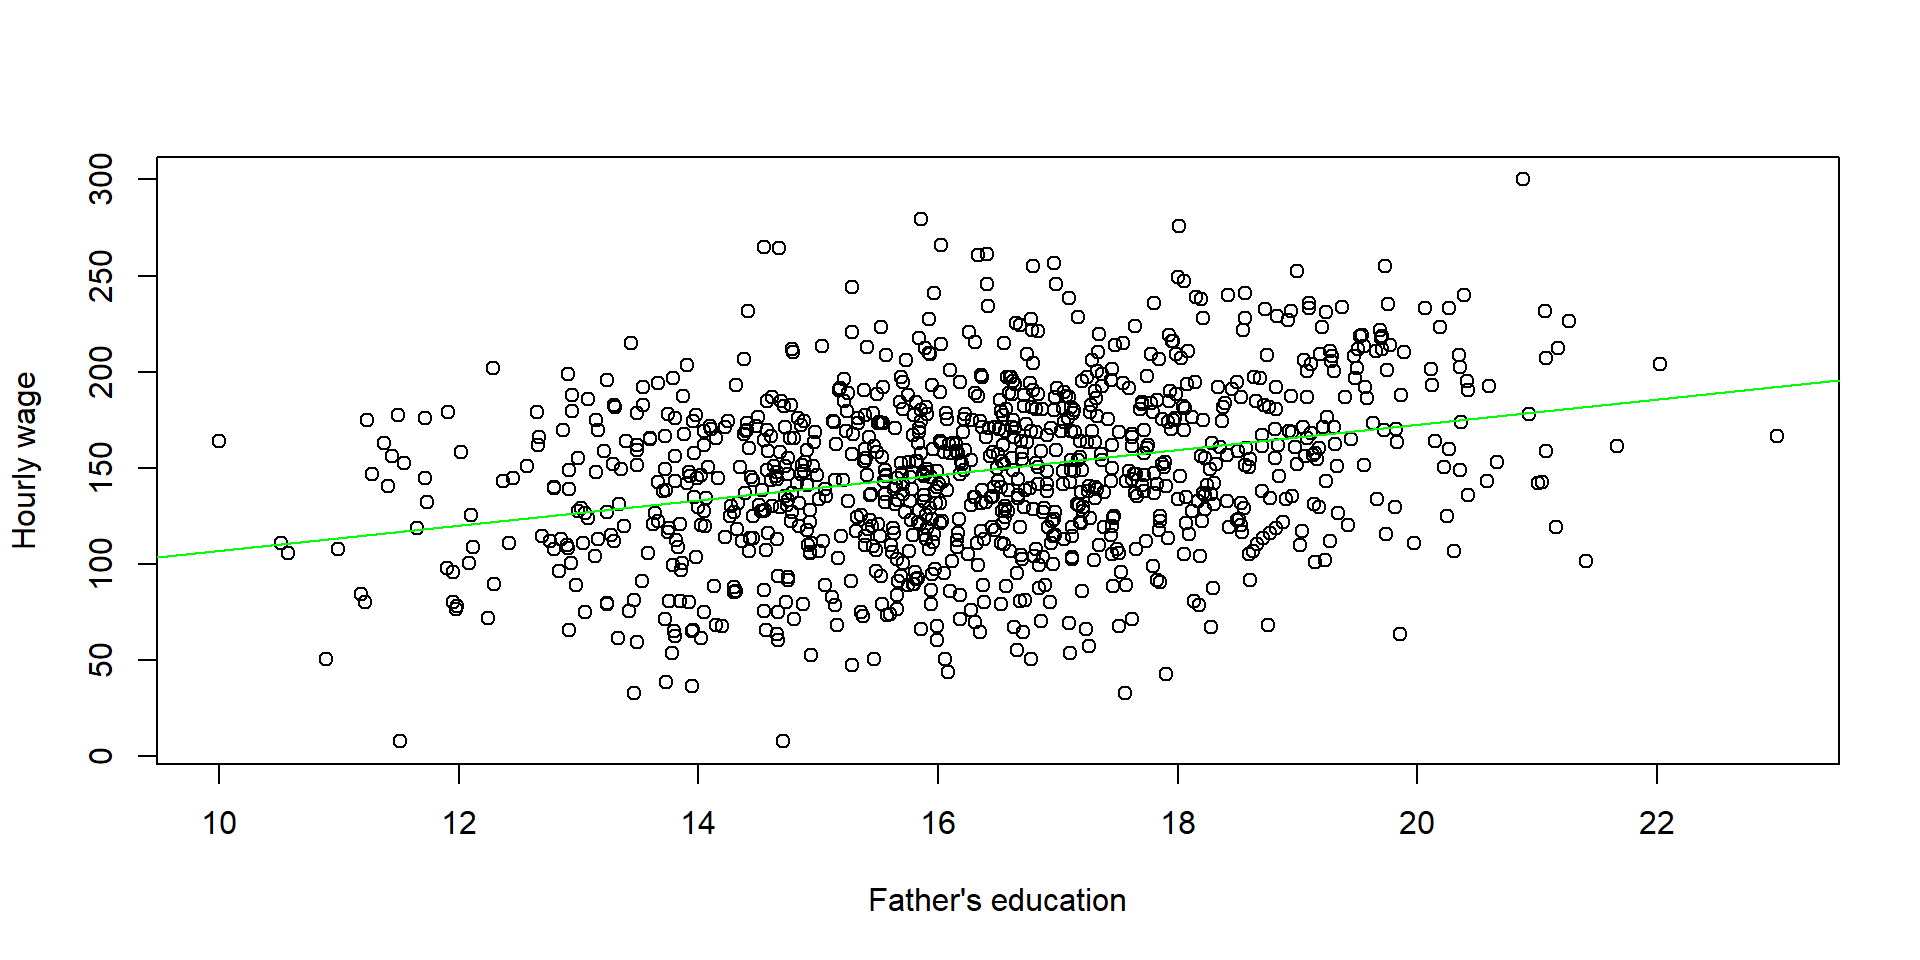 Correlation between Y and the omitted variable